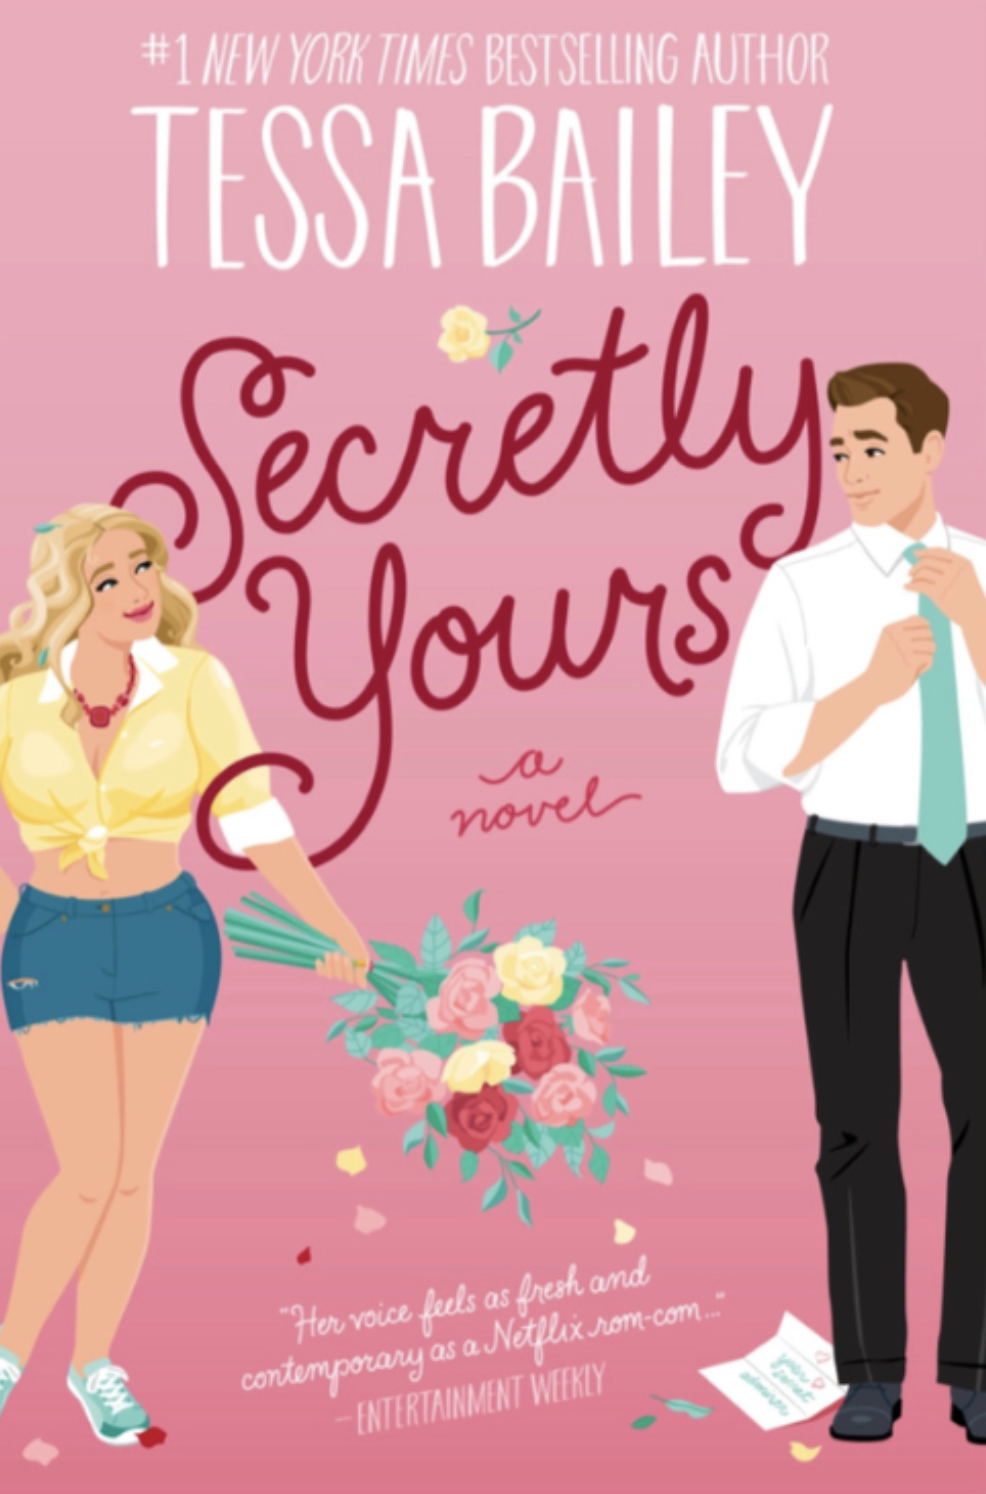 Review Secretly Yours by Tessa Bailey